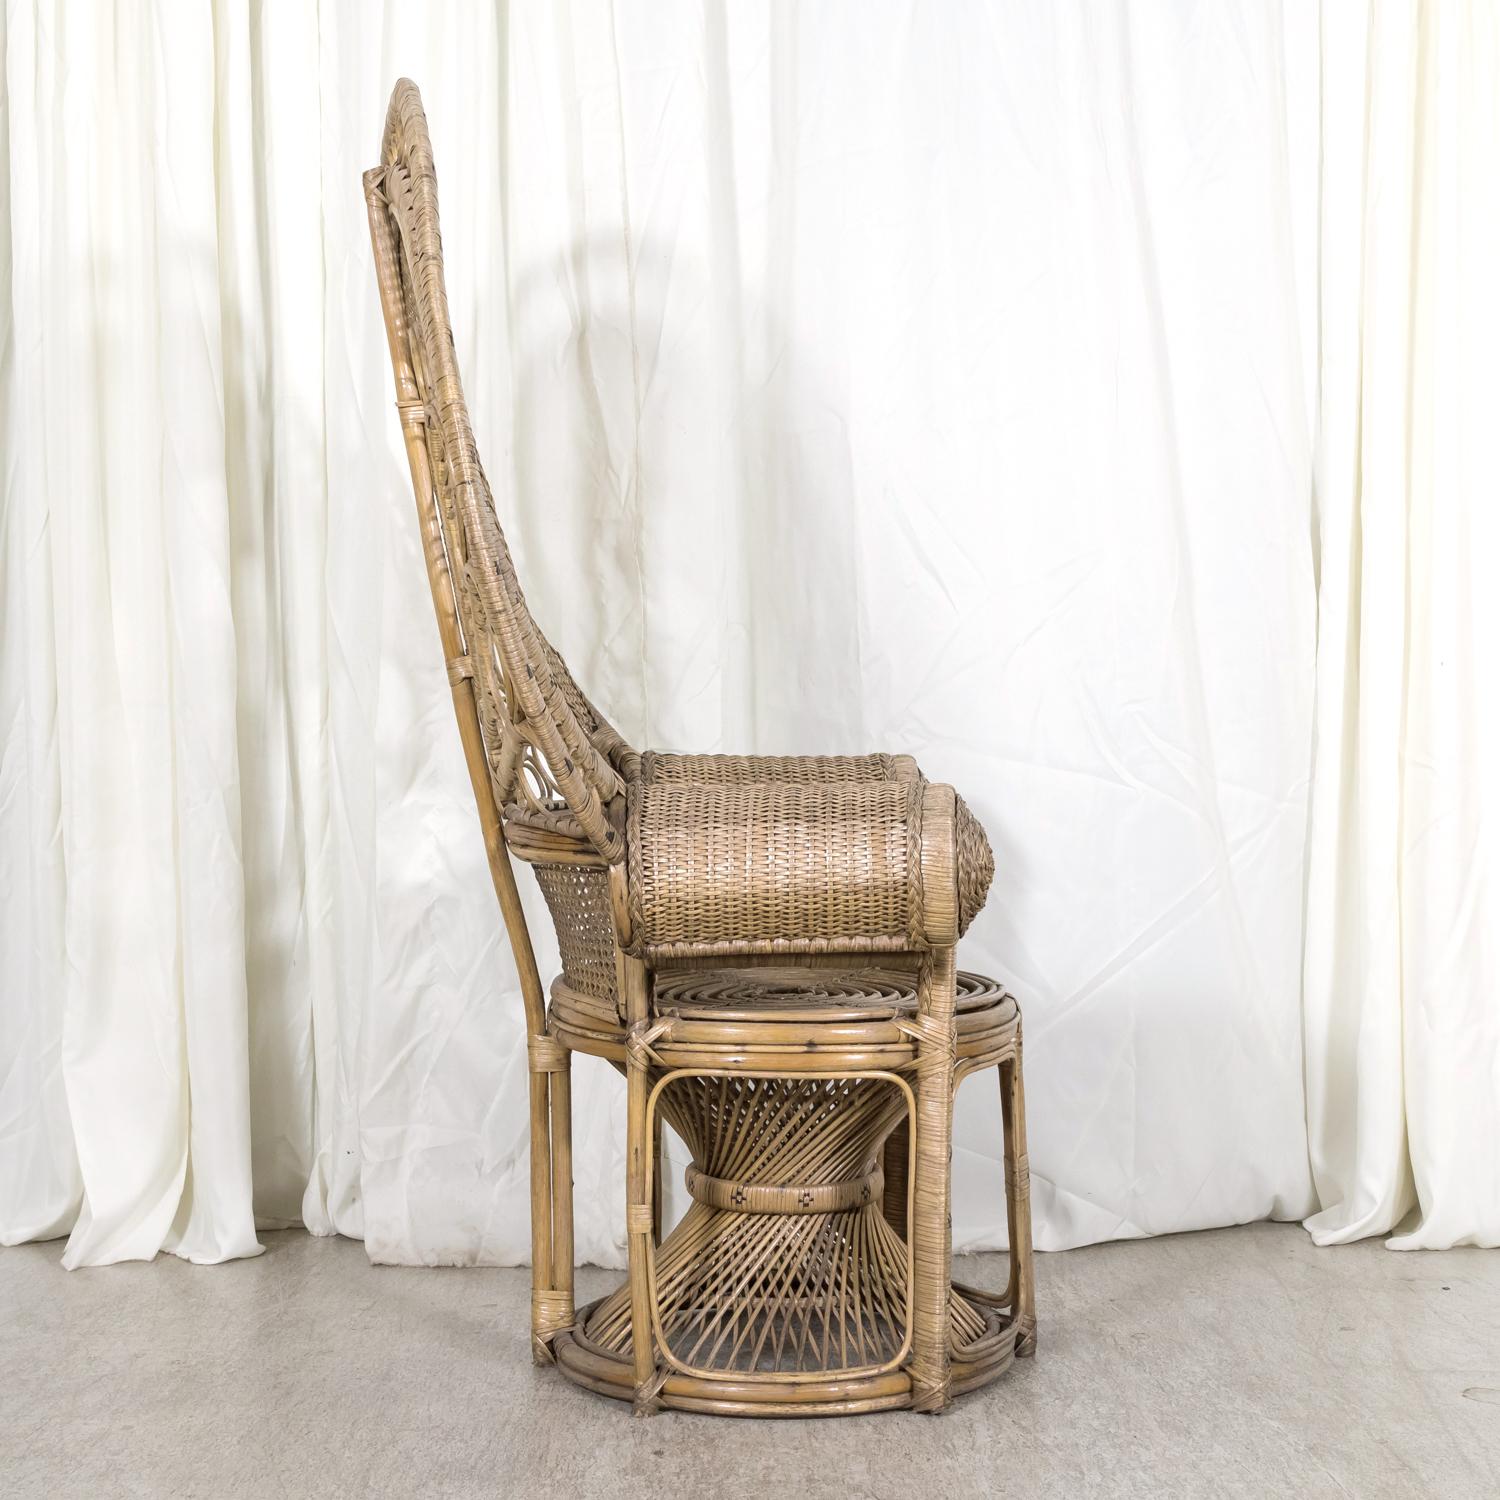 Rare 1930s French Wicker Rattan Emmanuelle Peacock Chair For Sale 10